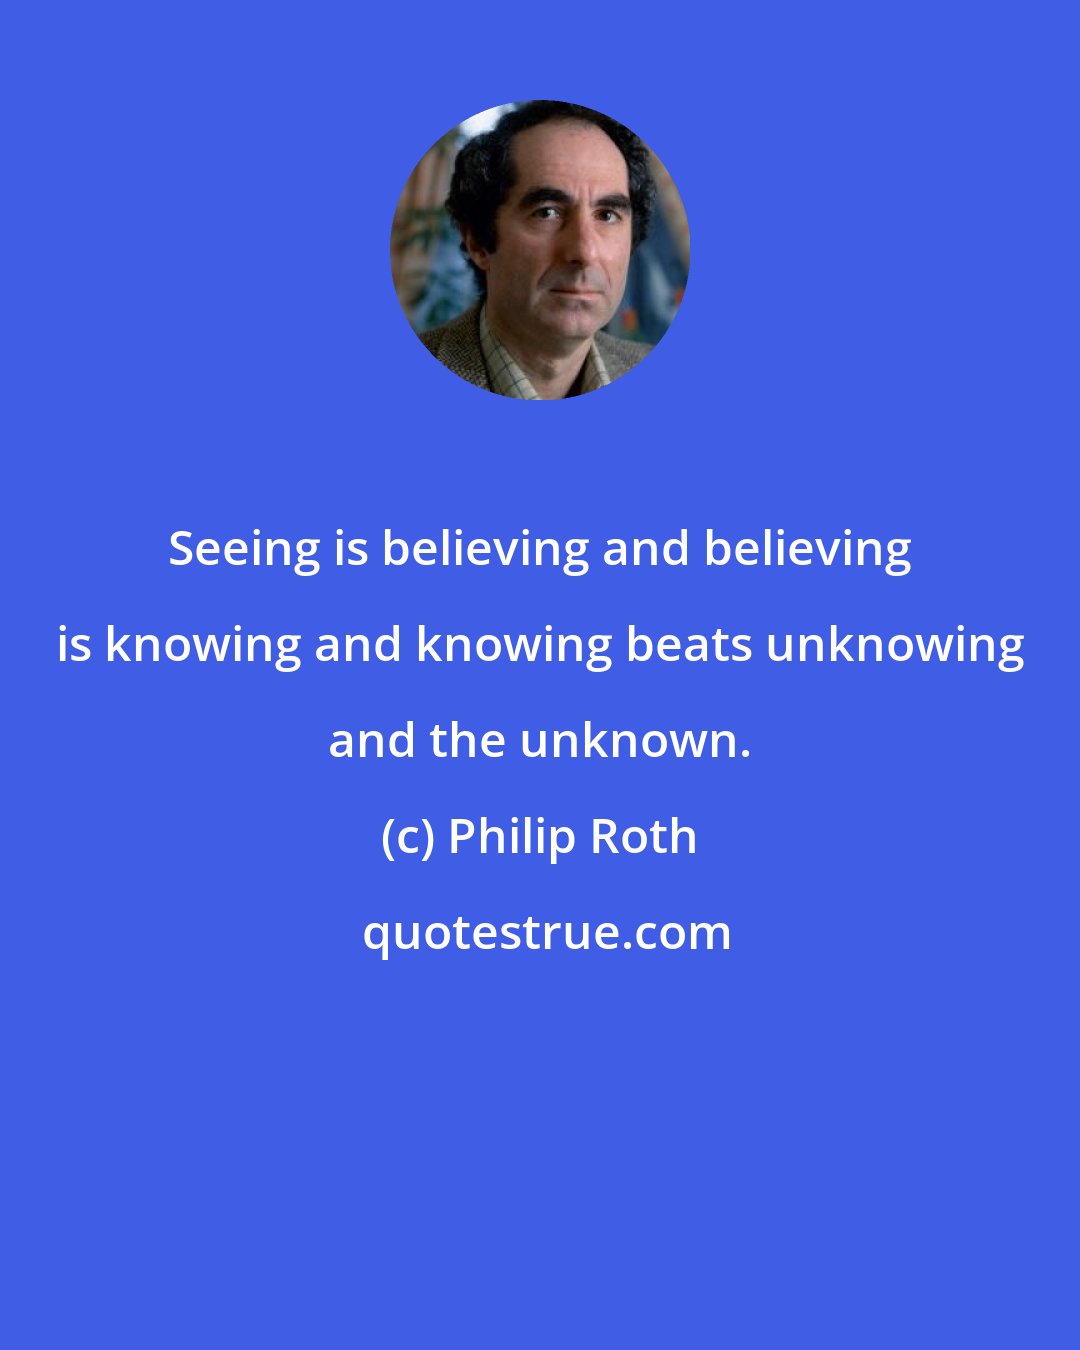 Philip Roth: Seeing is believing and believing is knowing and knowing beats unknowing and the unknown.